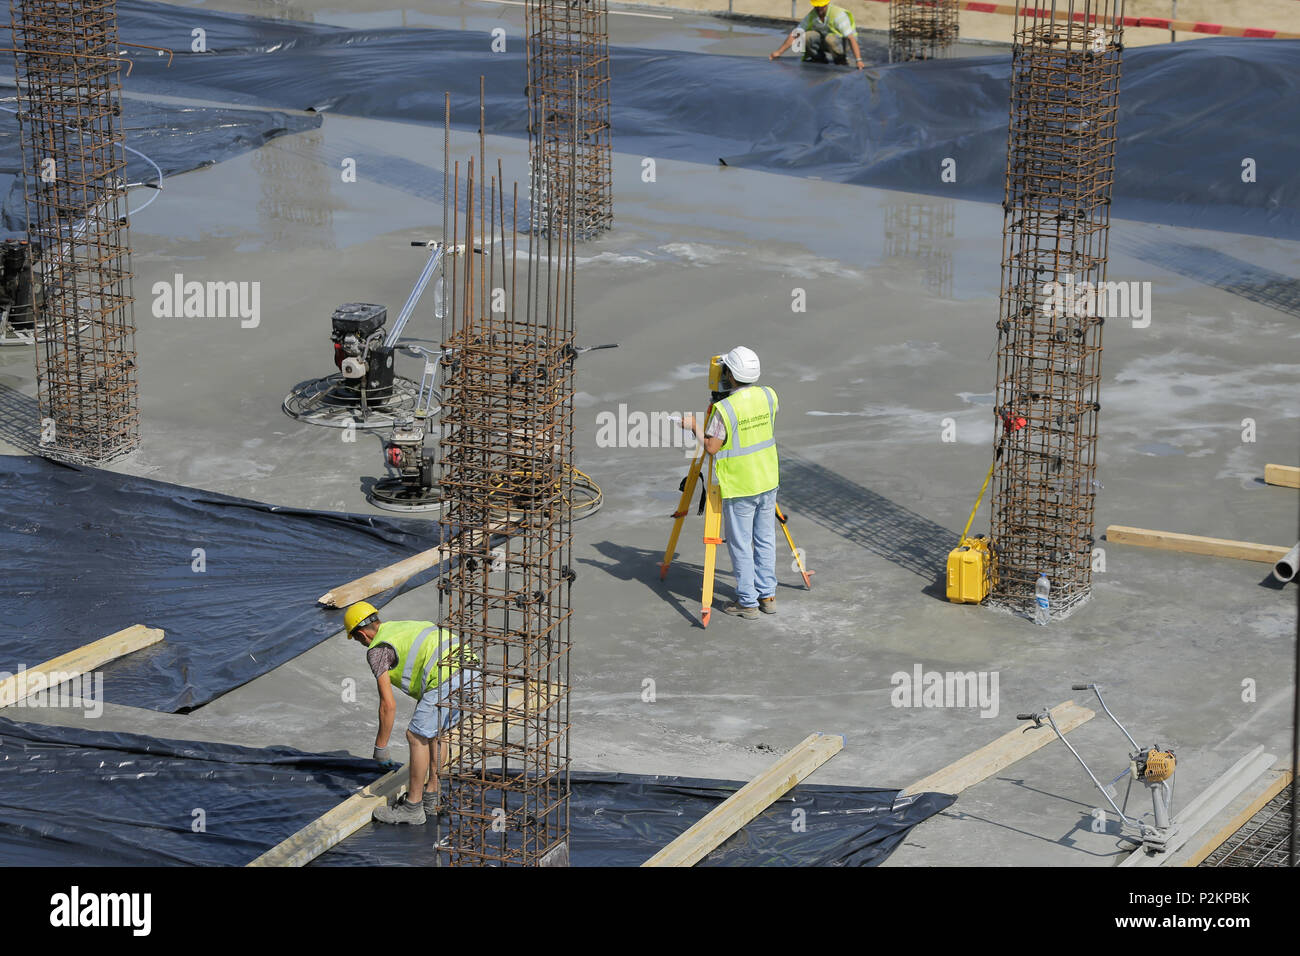 BUCHAREST, ROMANIA - JUNE 14, 2018: Cadastral engineer conducting land management expertise on a construction site Stock Photo